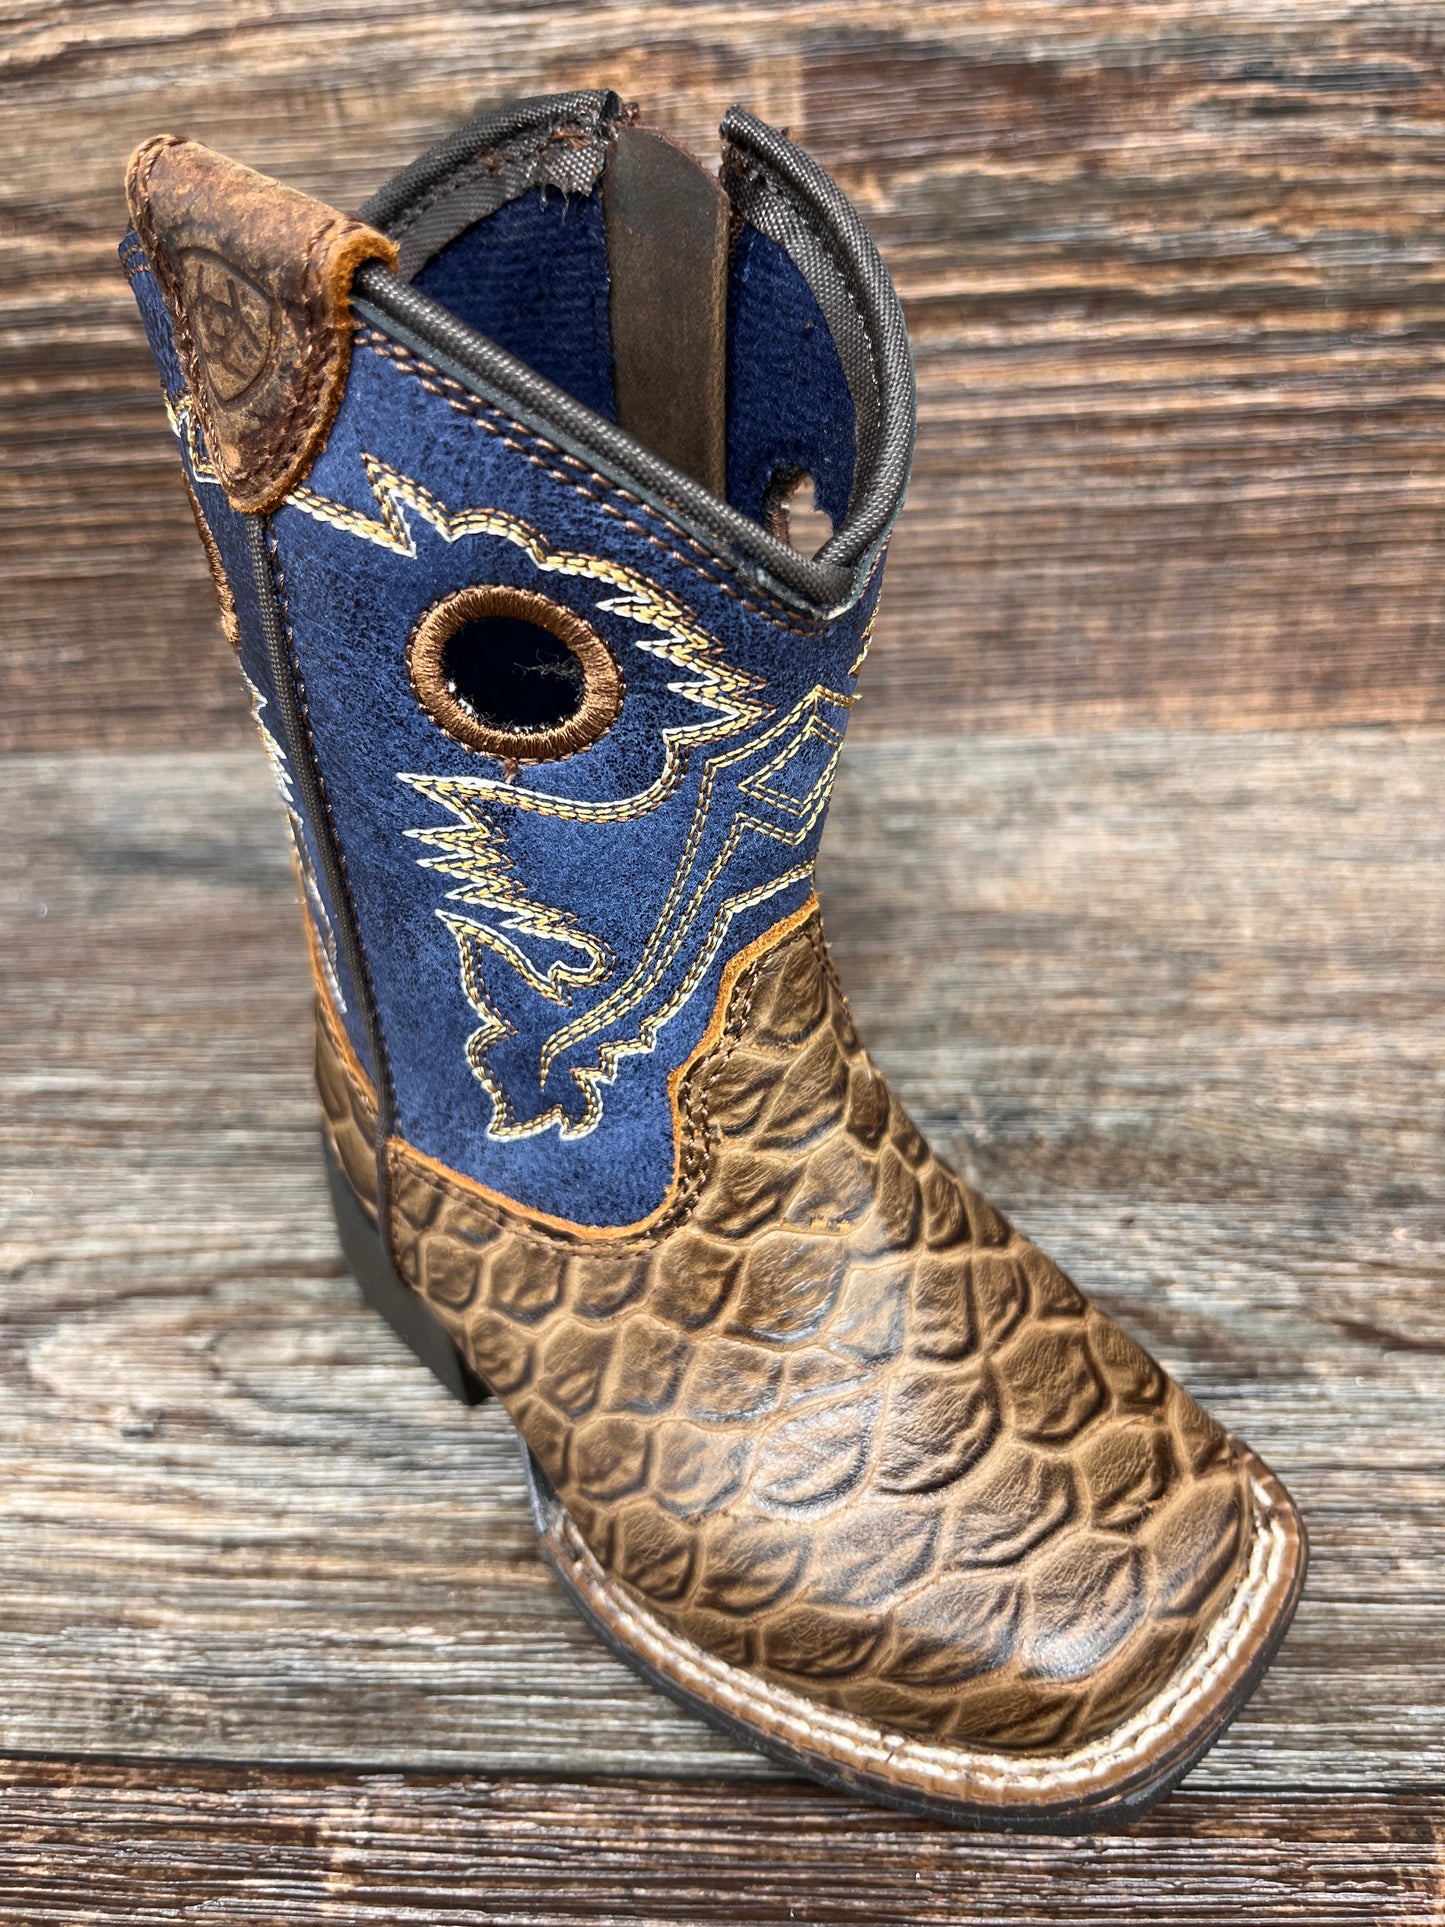 A441000202 Toddler's Ariat Orlando Fish Print Square Toe Western Boot by M&F Western Products